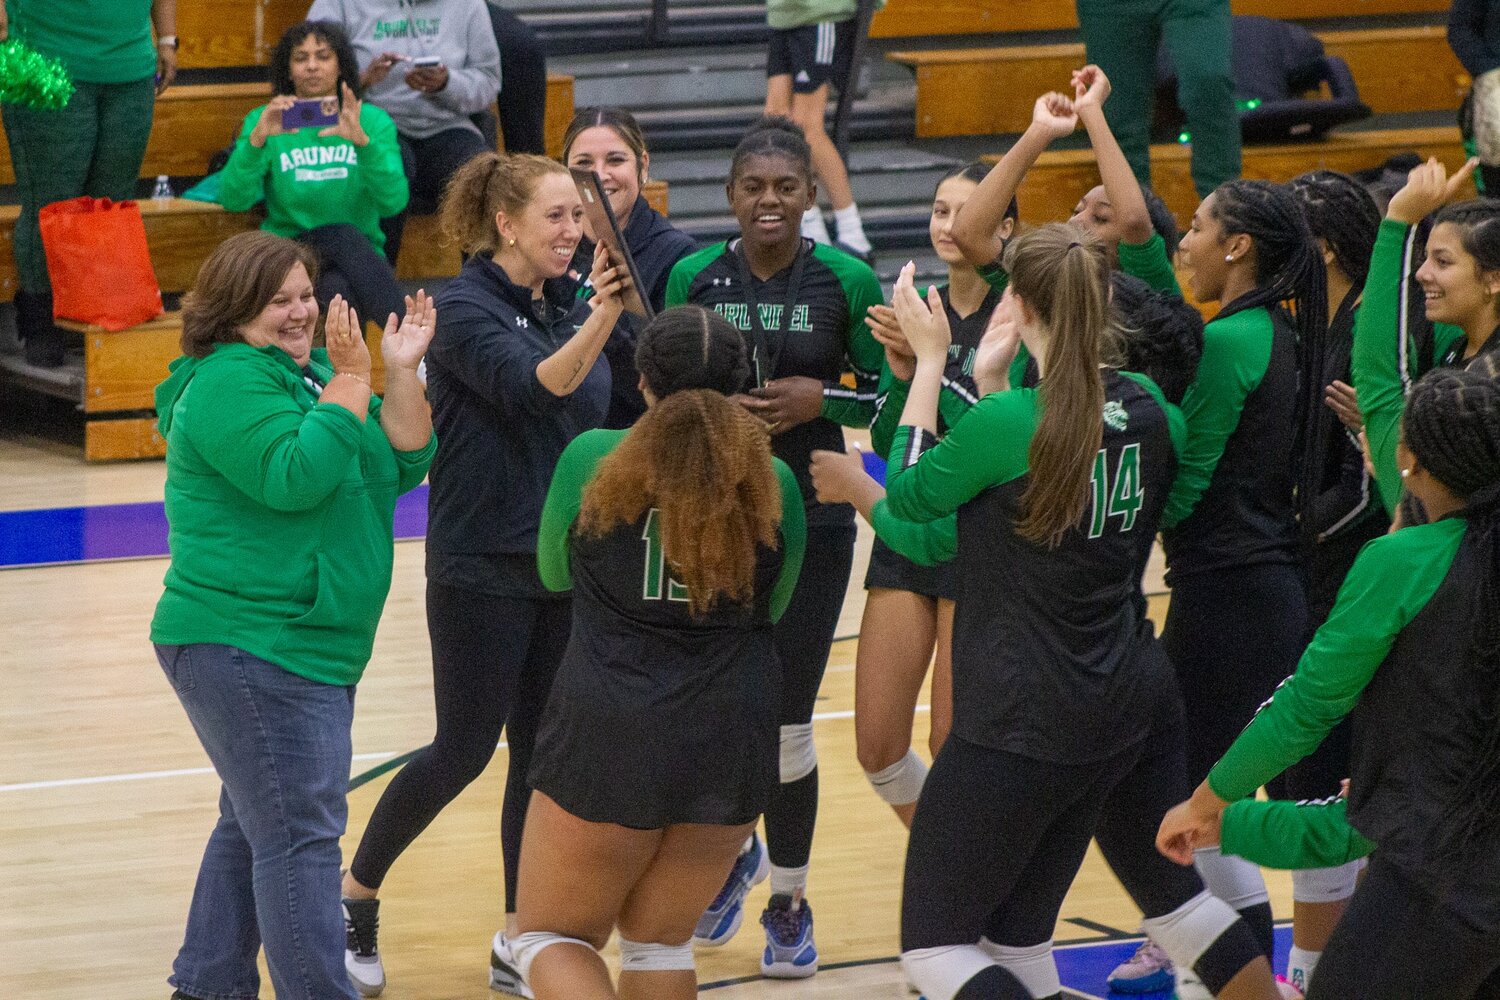 The Wildcats celebrated after winning the volleyball county championship.